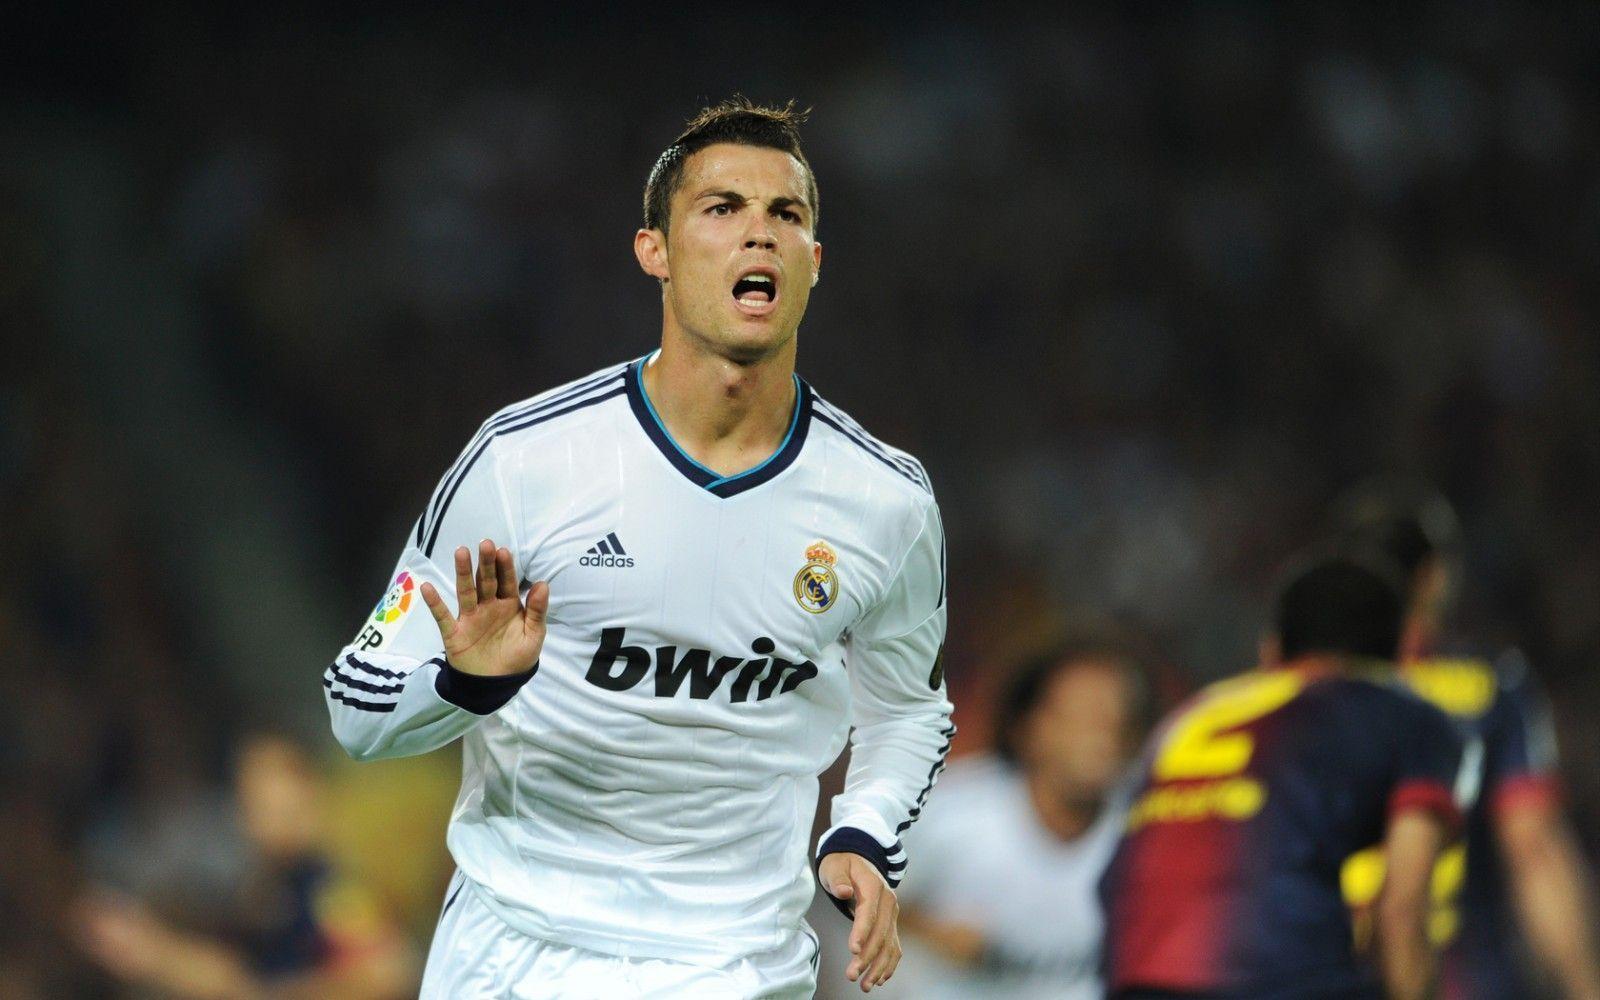 Cristiano Ronaldo HD Wallpapers Latest New Backgrounds